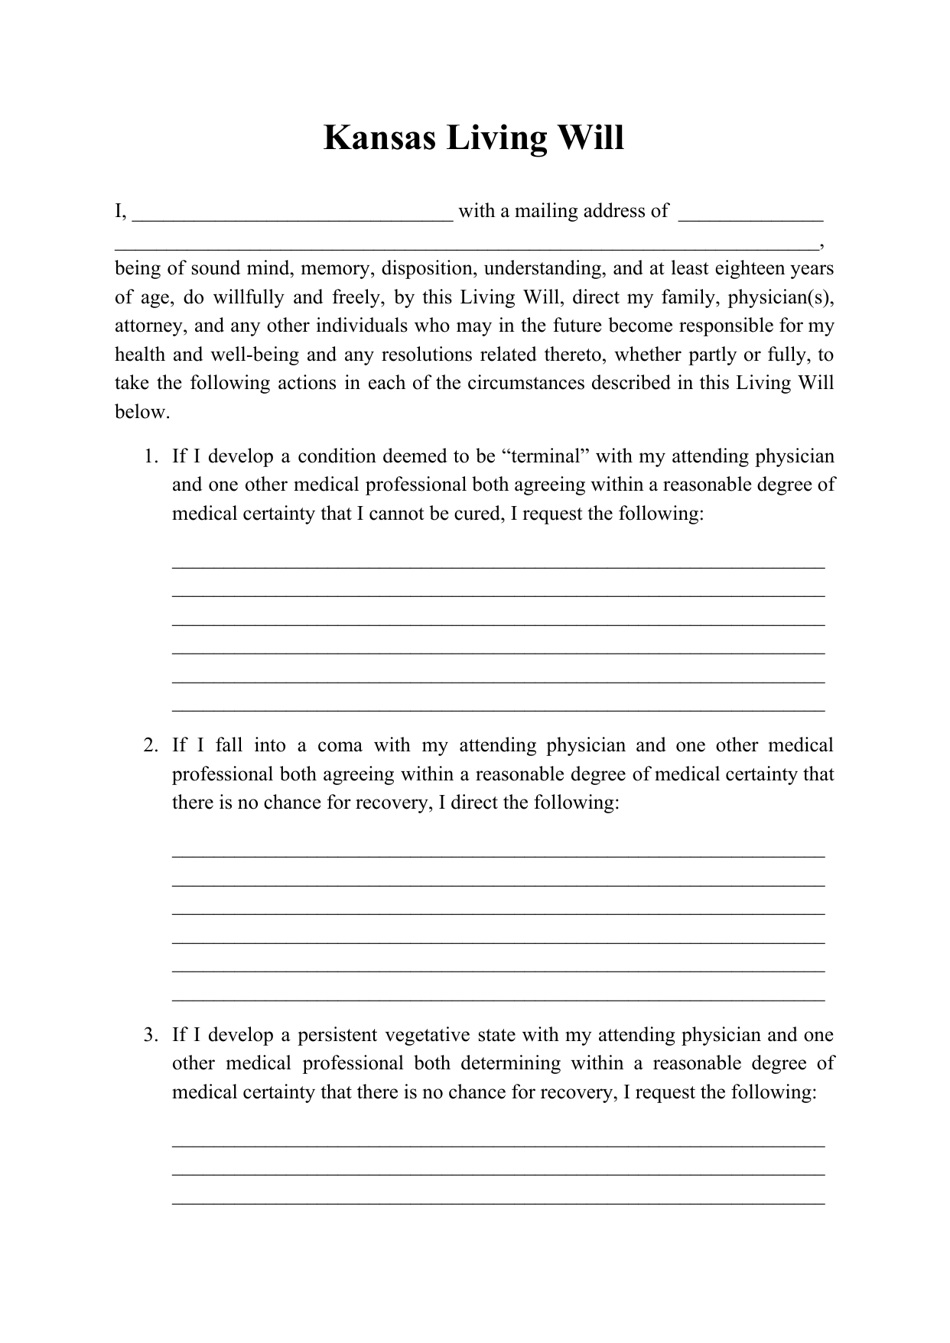 kansas-living-will-form-fill-out-sign-online-and-download-pdf